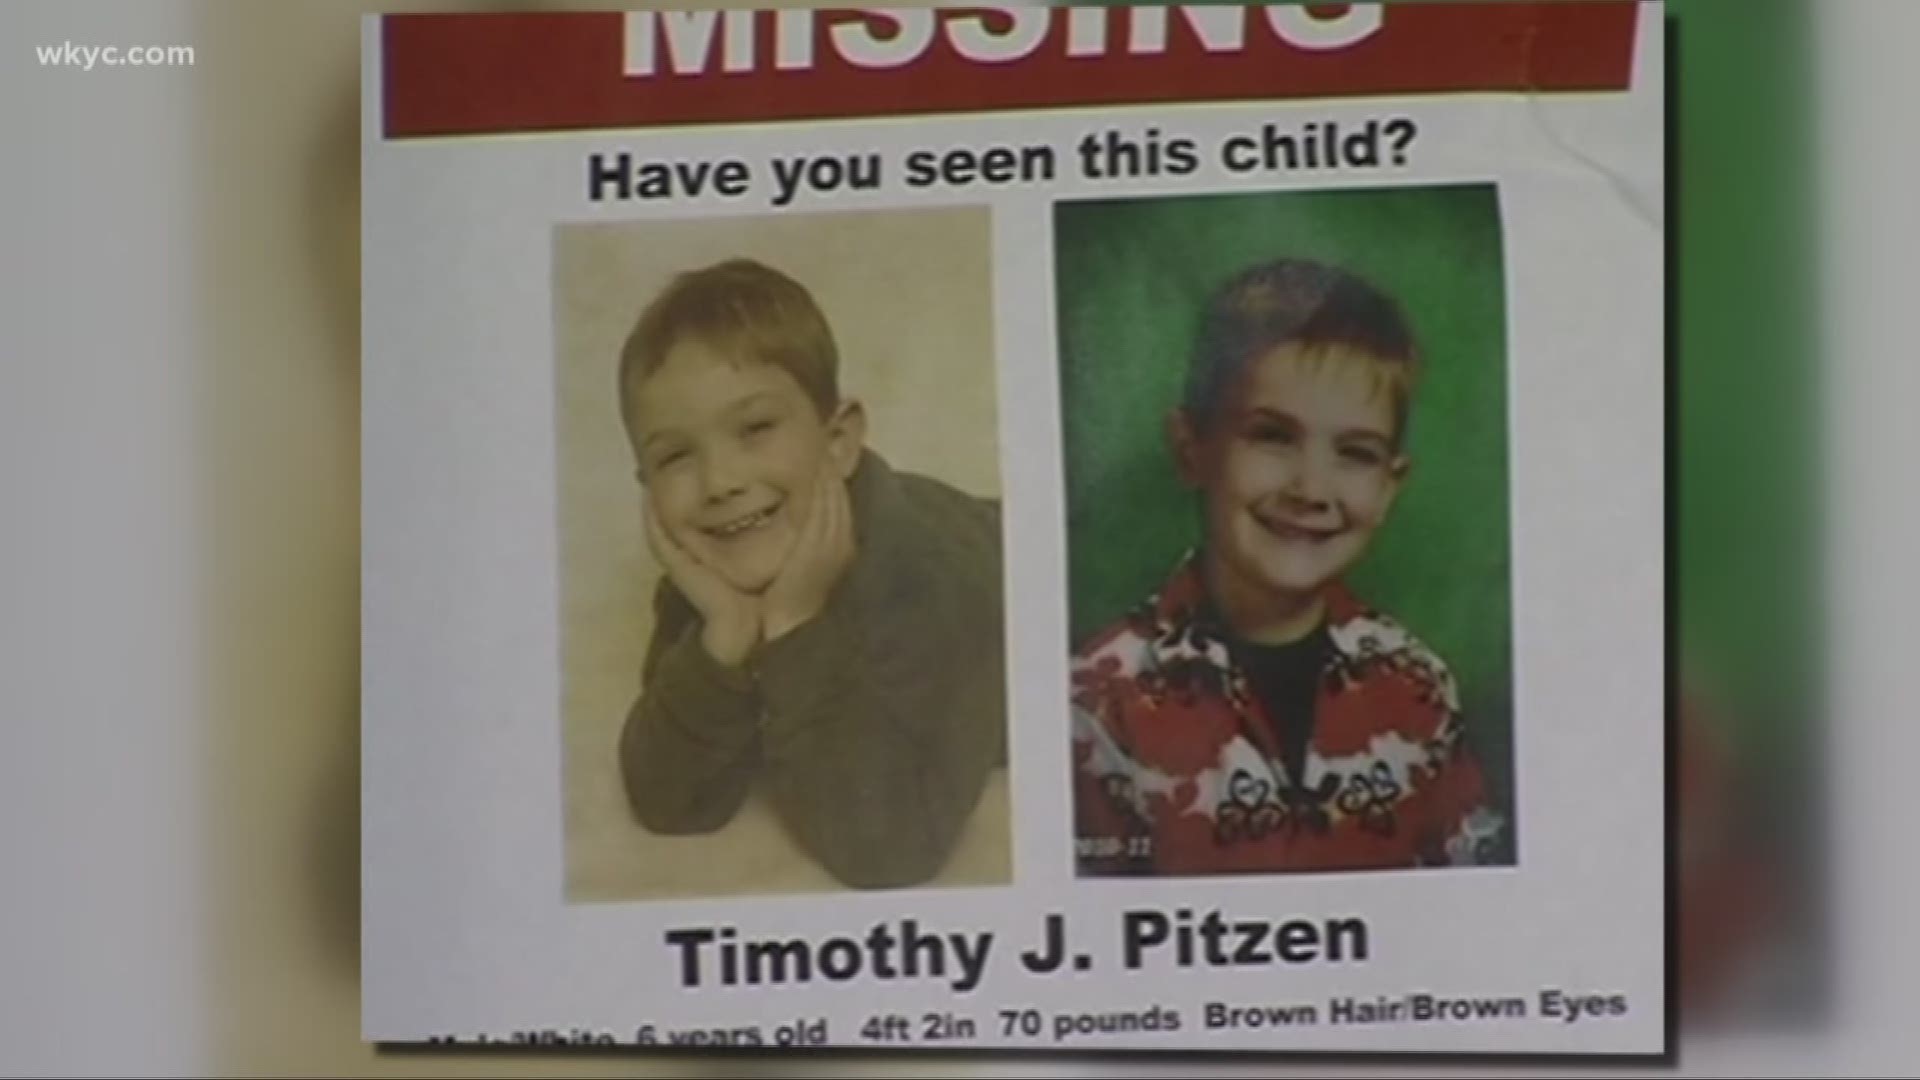 14-year-old found near Cincinnati says he is Illinois boy who went missing in 2011